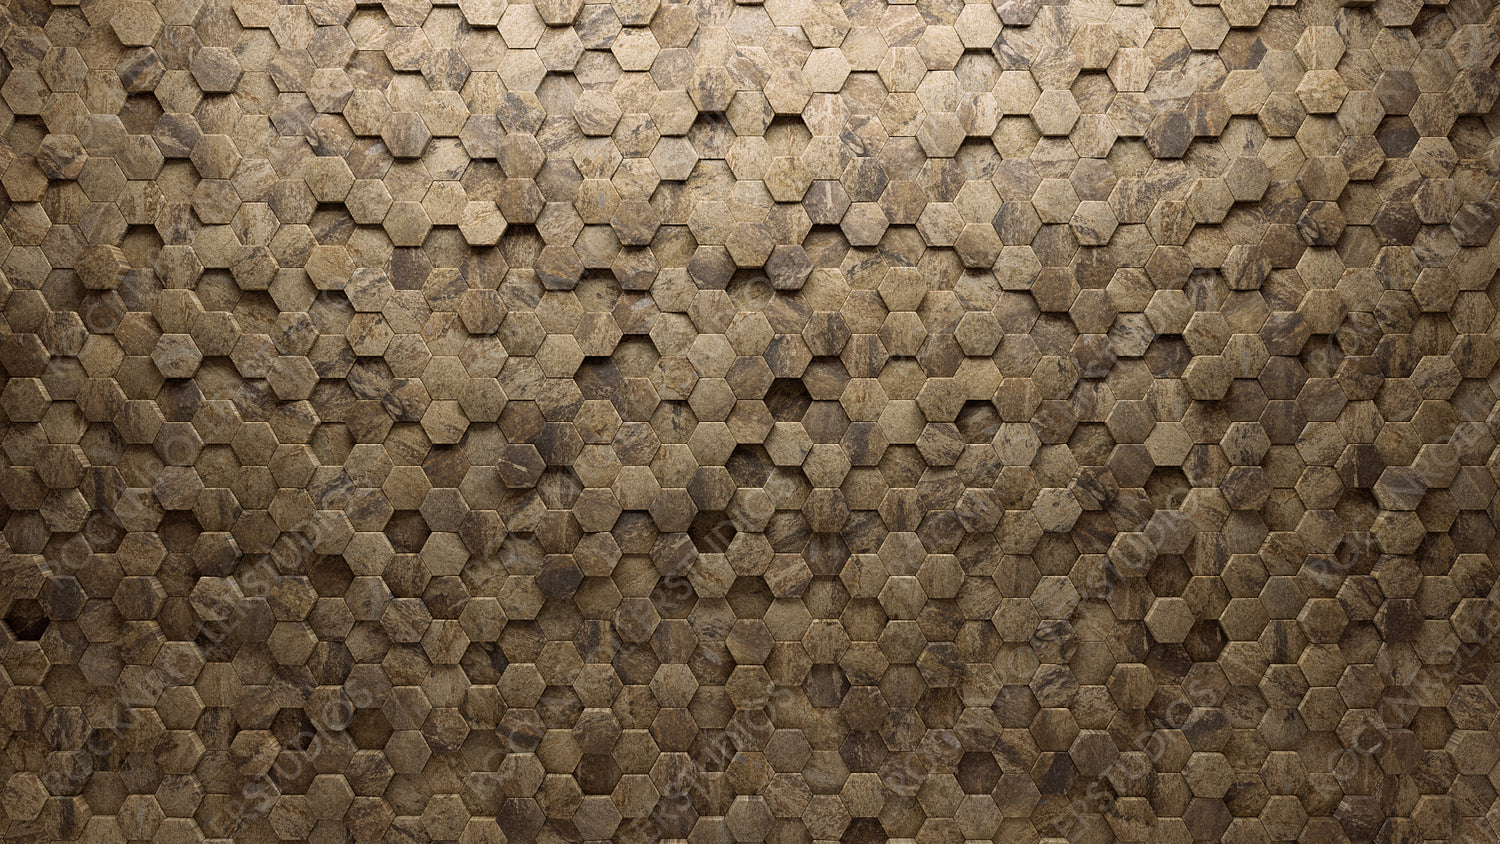 3D, Natural Stone Wall background with tiles. Hexagonal, tile Wallpaper with Textured, Polished blocks. 3D Render